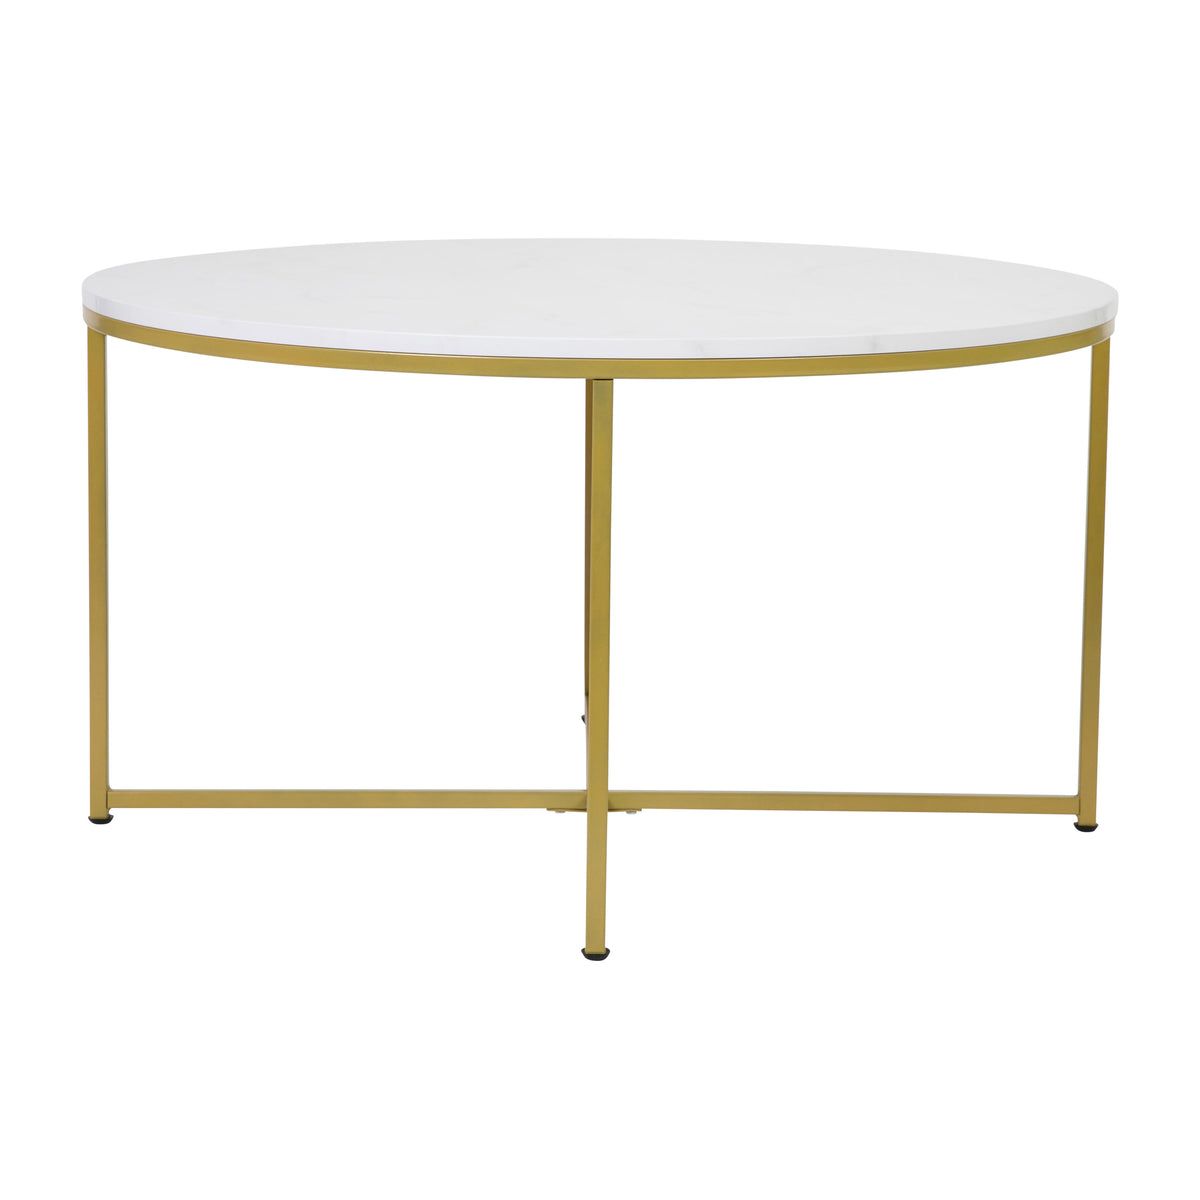 White Marble Top/Brushed Gold Frame |#| White Marble Finish Coffee Table with Crisscross Brushed Gold Metal Frame